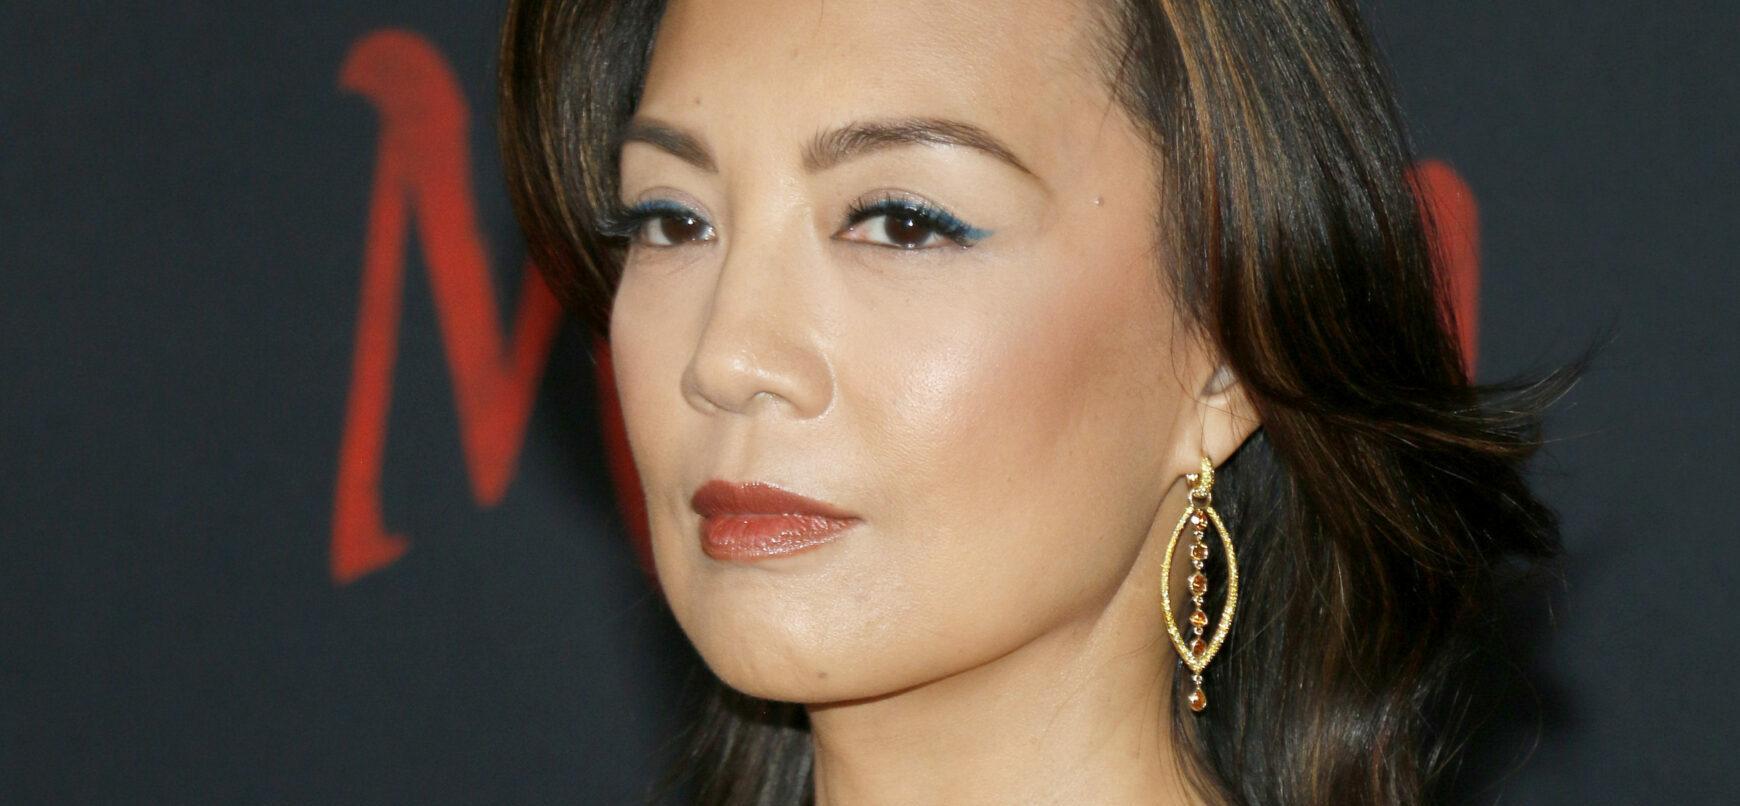 Ming Na Wen at Disney's 'Mulan' held at the Dolby Theatre in Hollywood. 09 Mar 2020 Pictured: Ming-Na Wen. Photo credit: Lumeimages / MEGA TheMegaAgency.com +1 888 505 6342 (Mega Agency TagID: MEGA642184_021.jpg) [Photo via Mega Agency]